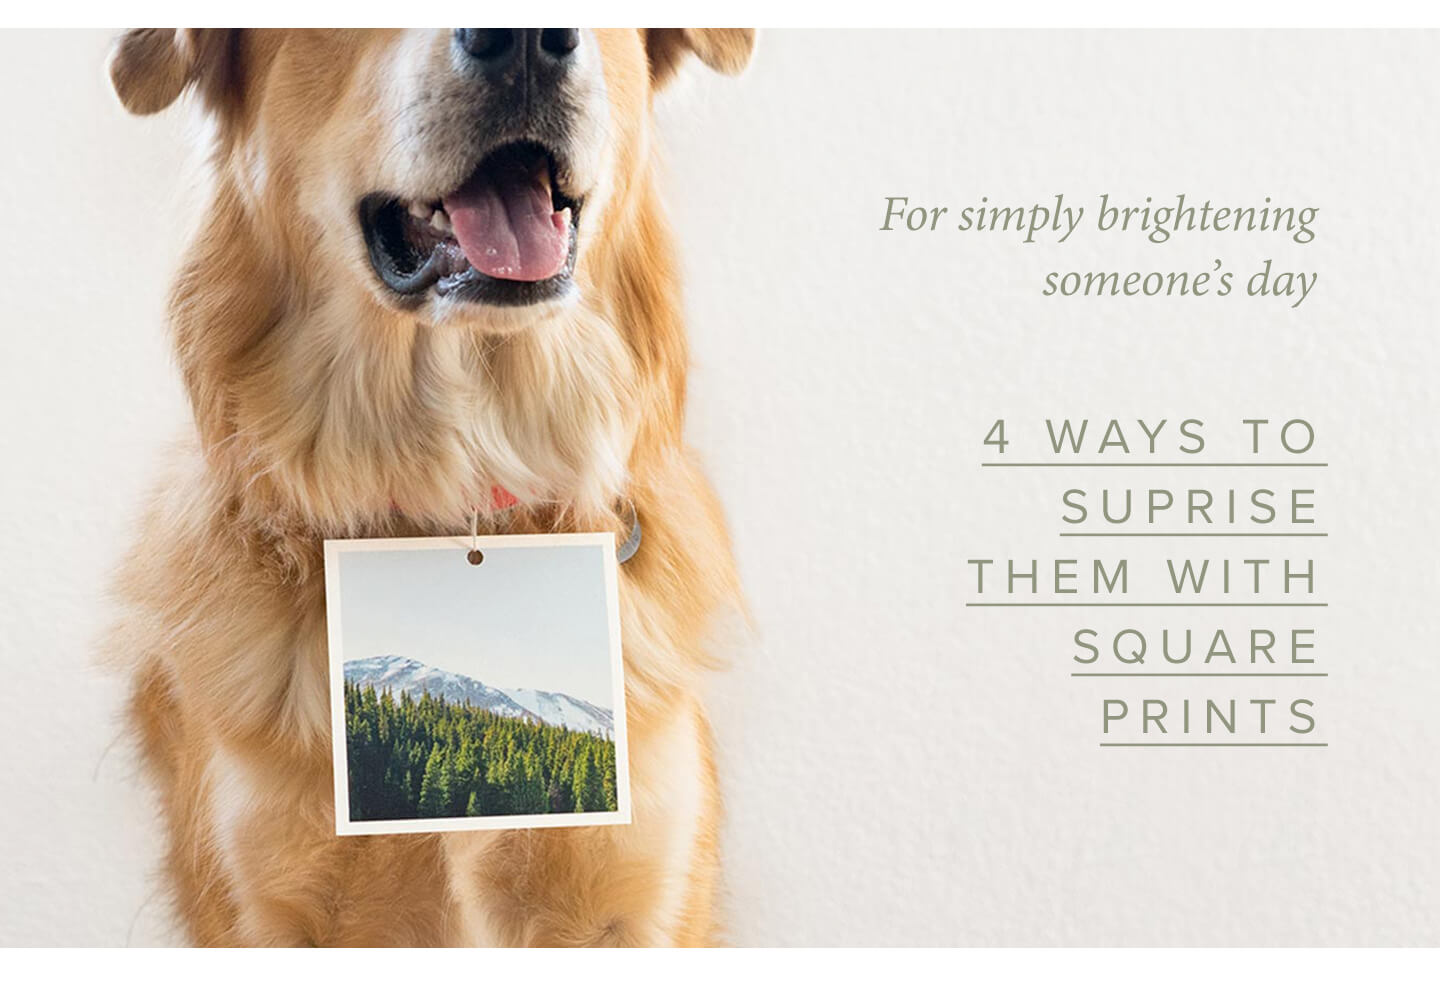 For simply brightening someone's day | 4 Ways to Surprise Them With Square Prints